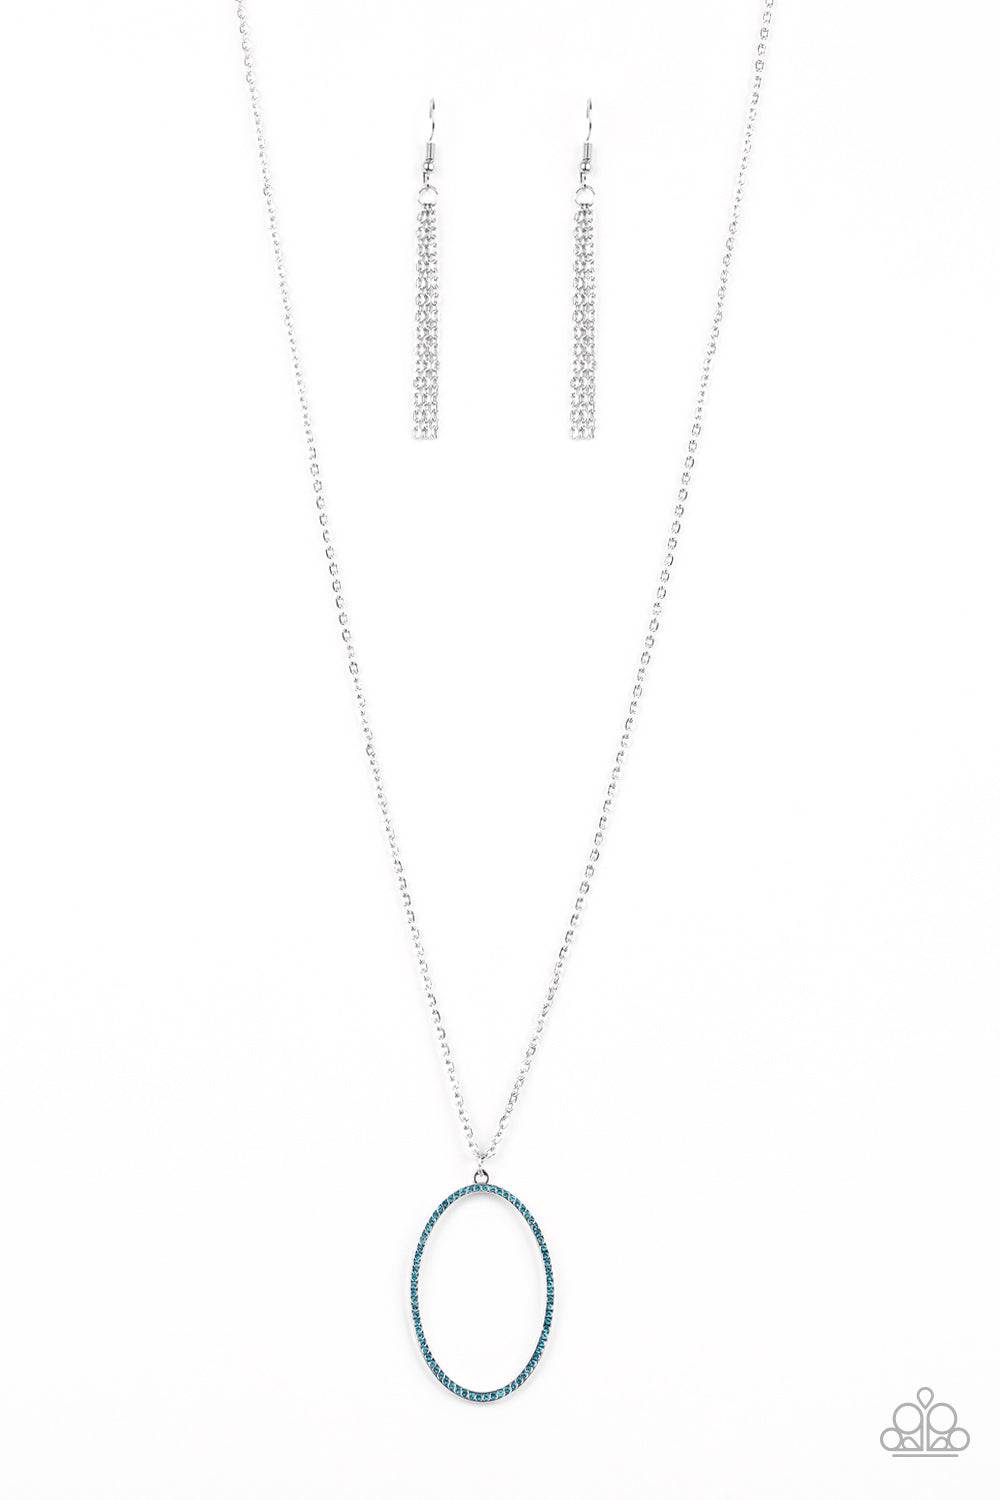 A Dazzling Distraction - Blue Necklace Set